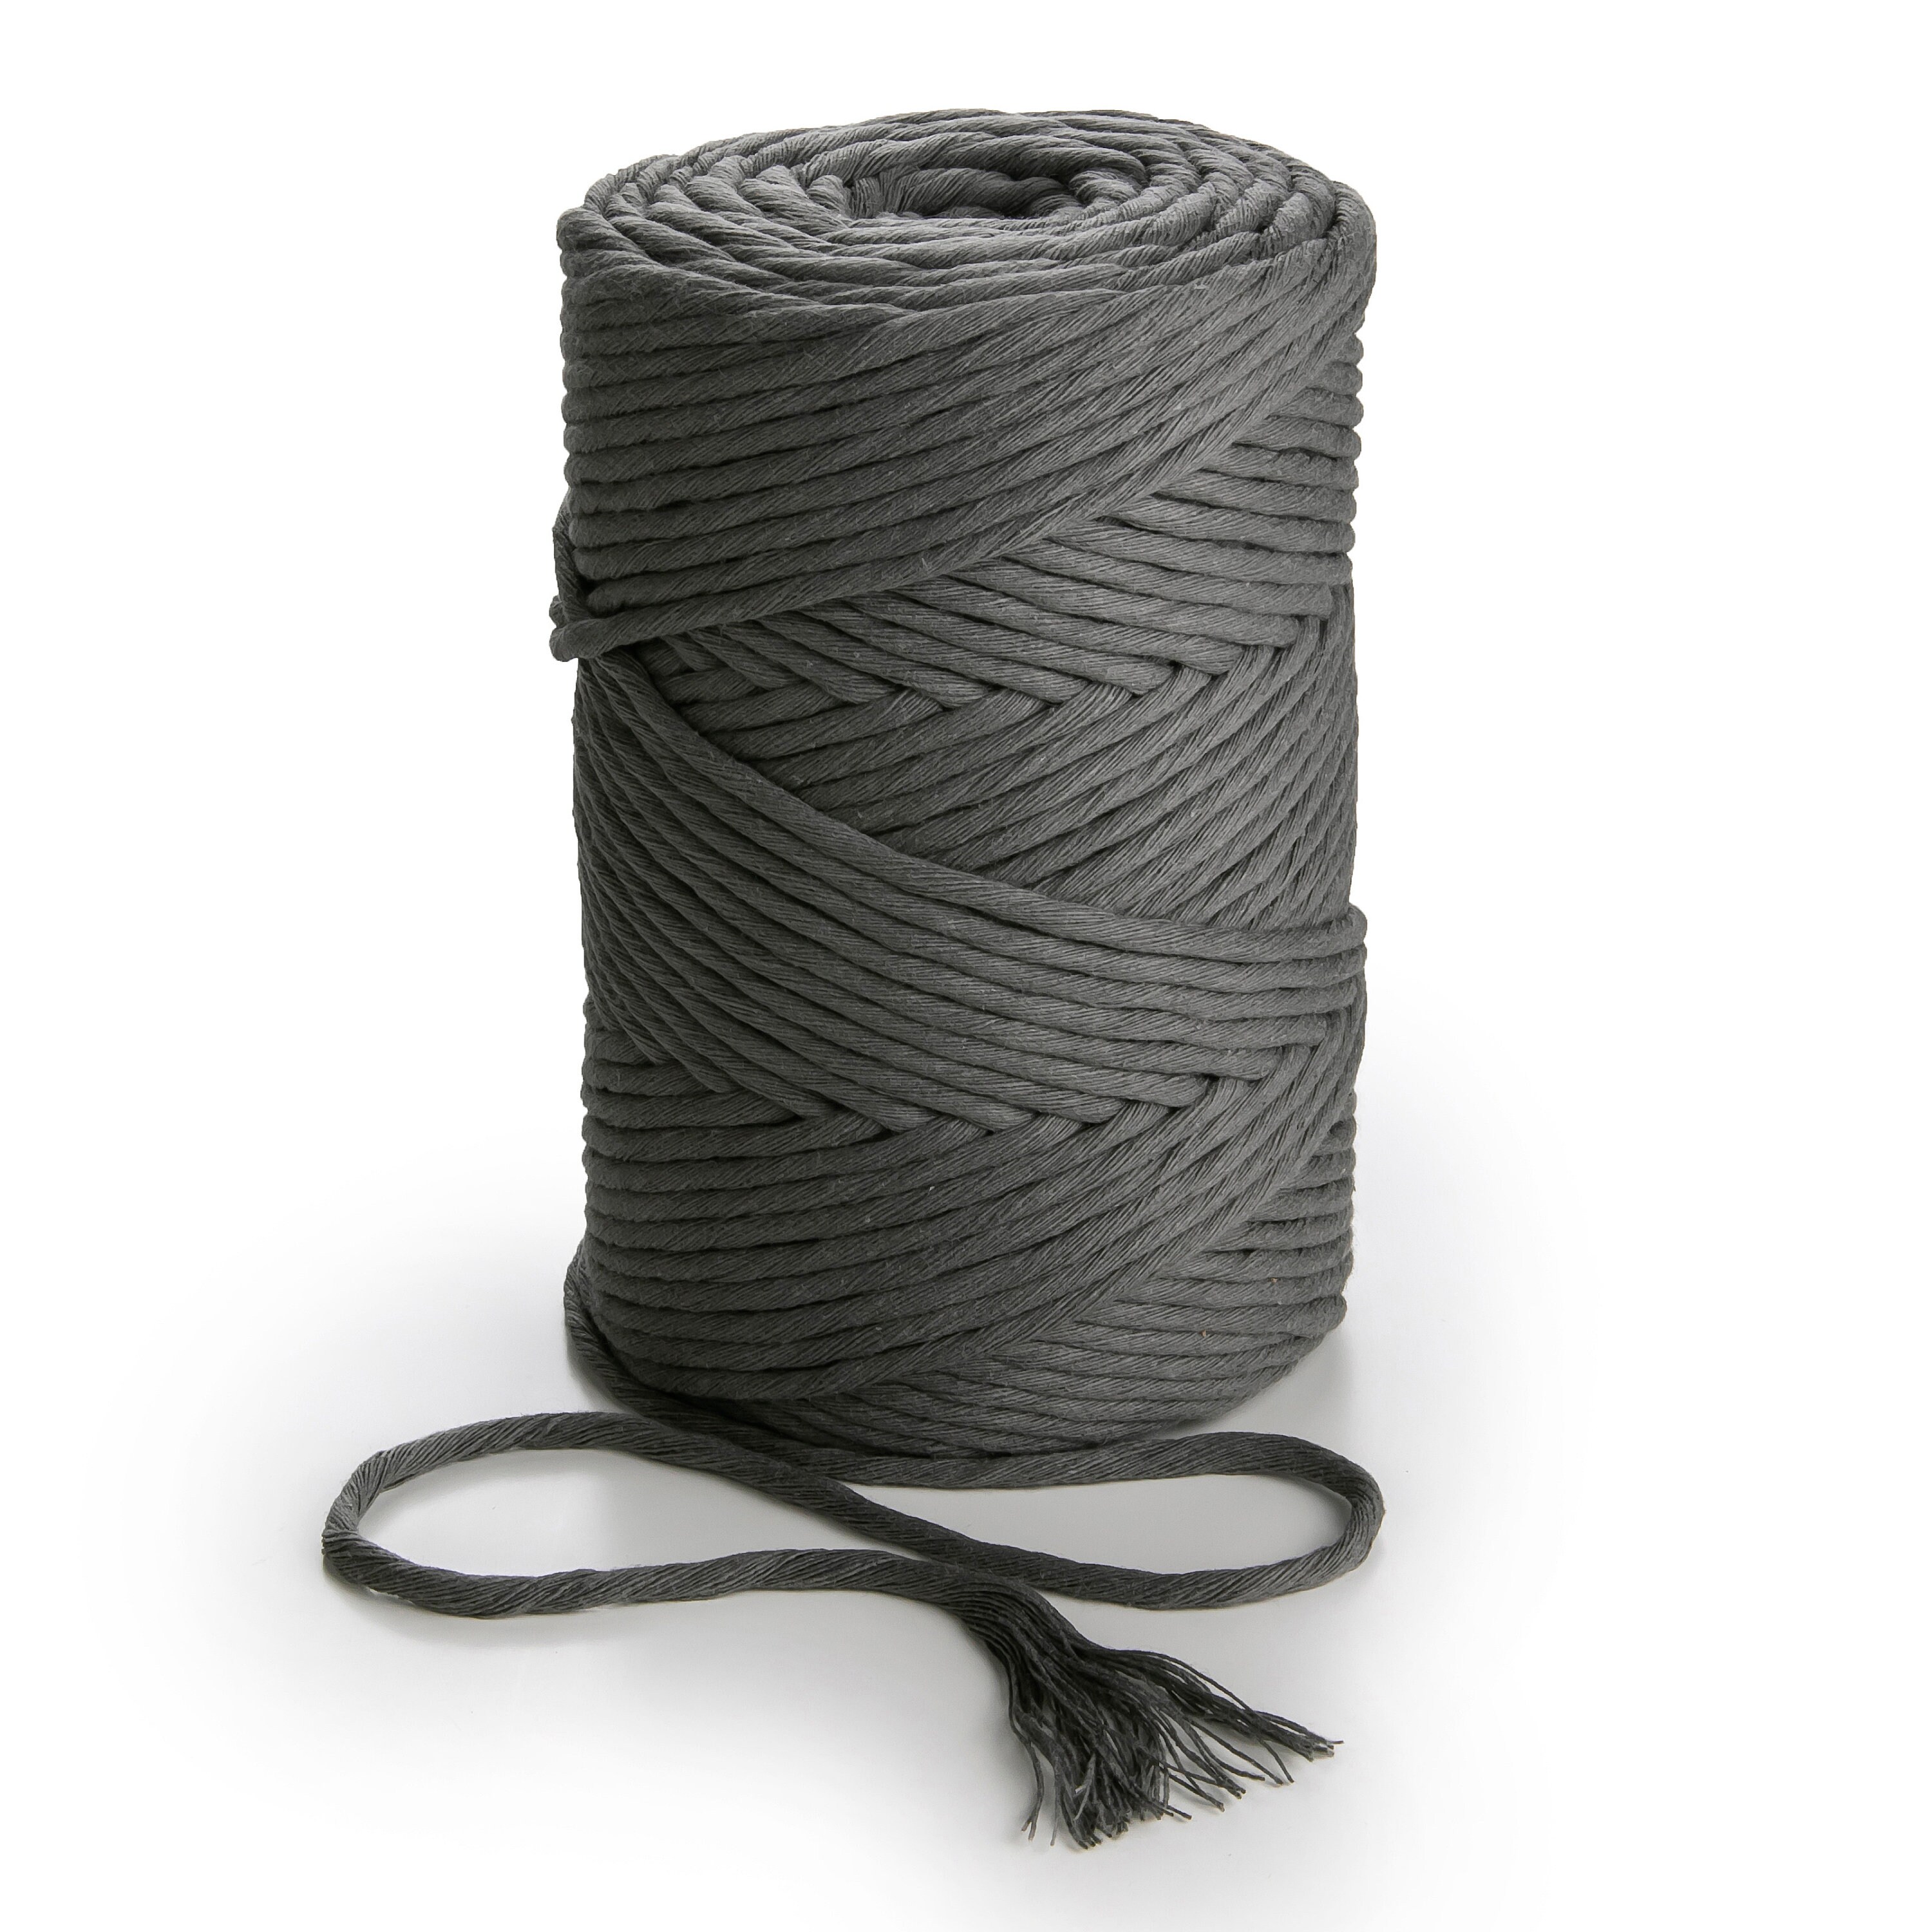 5mm Cotton Rope -  Canada